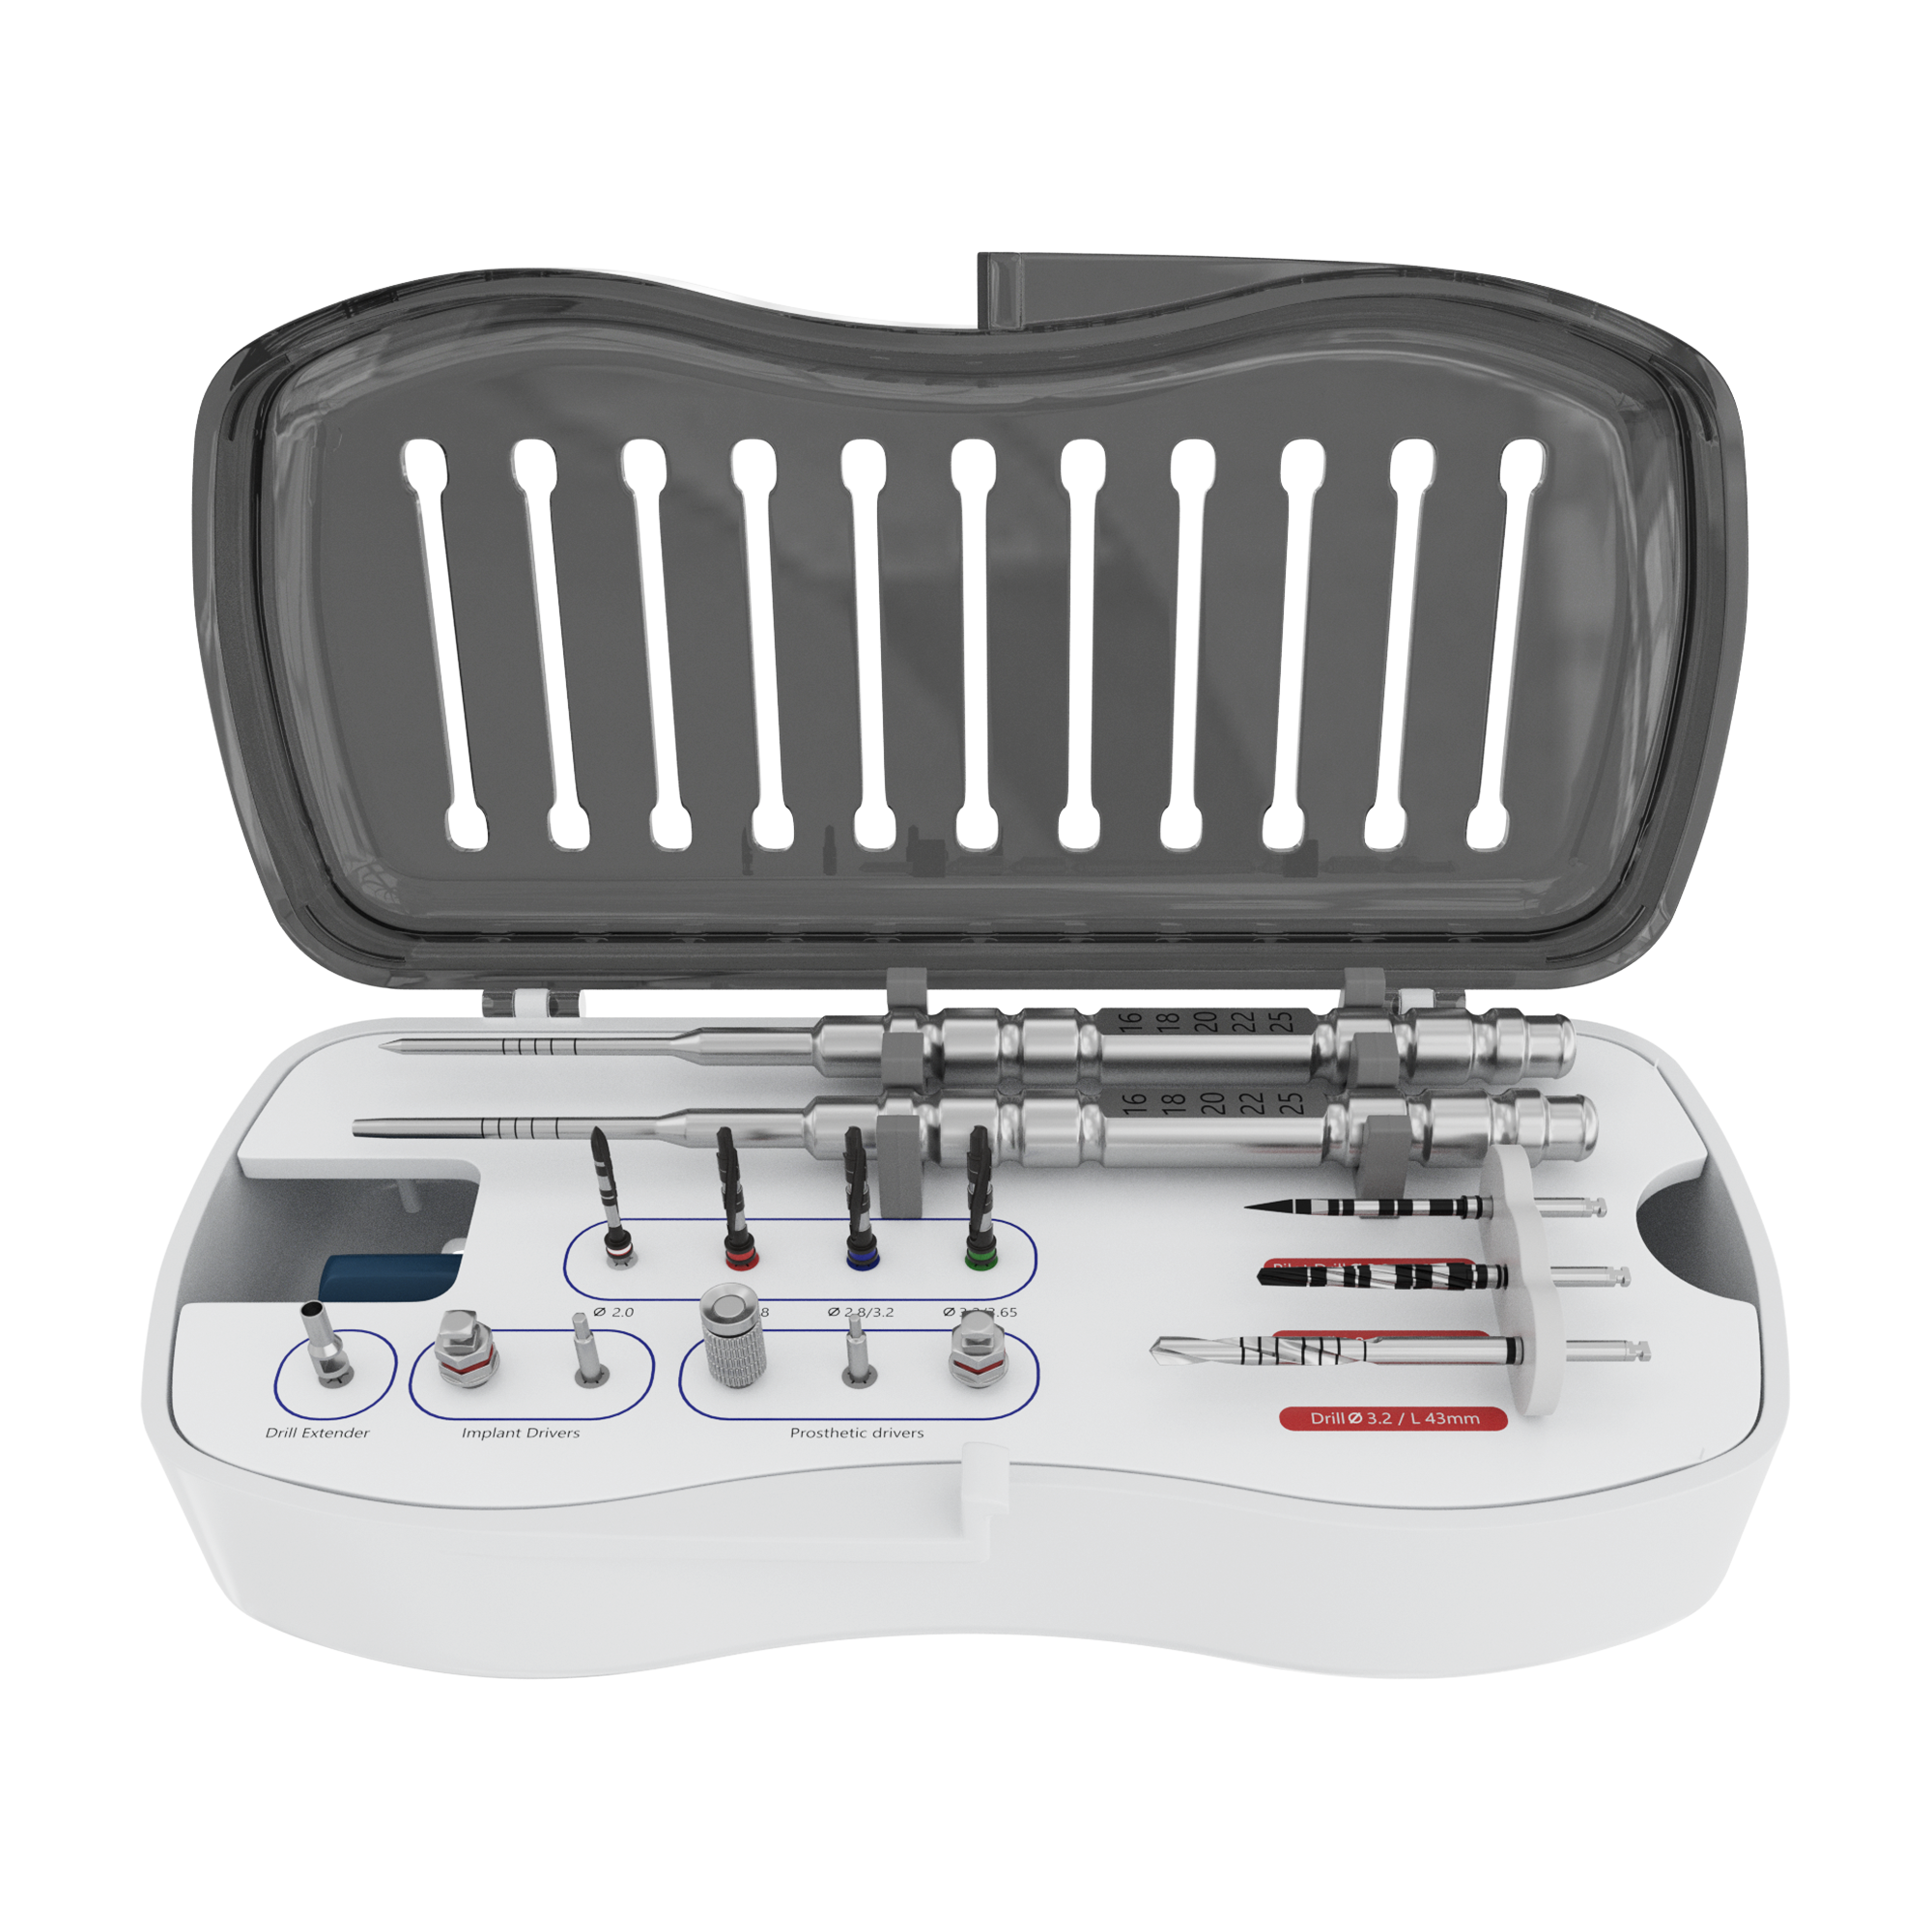 DSI SK-DSY Grip Ptery Surgical Kit For Implant Installation